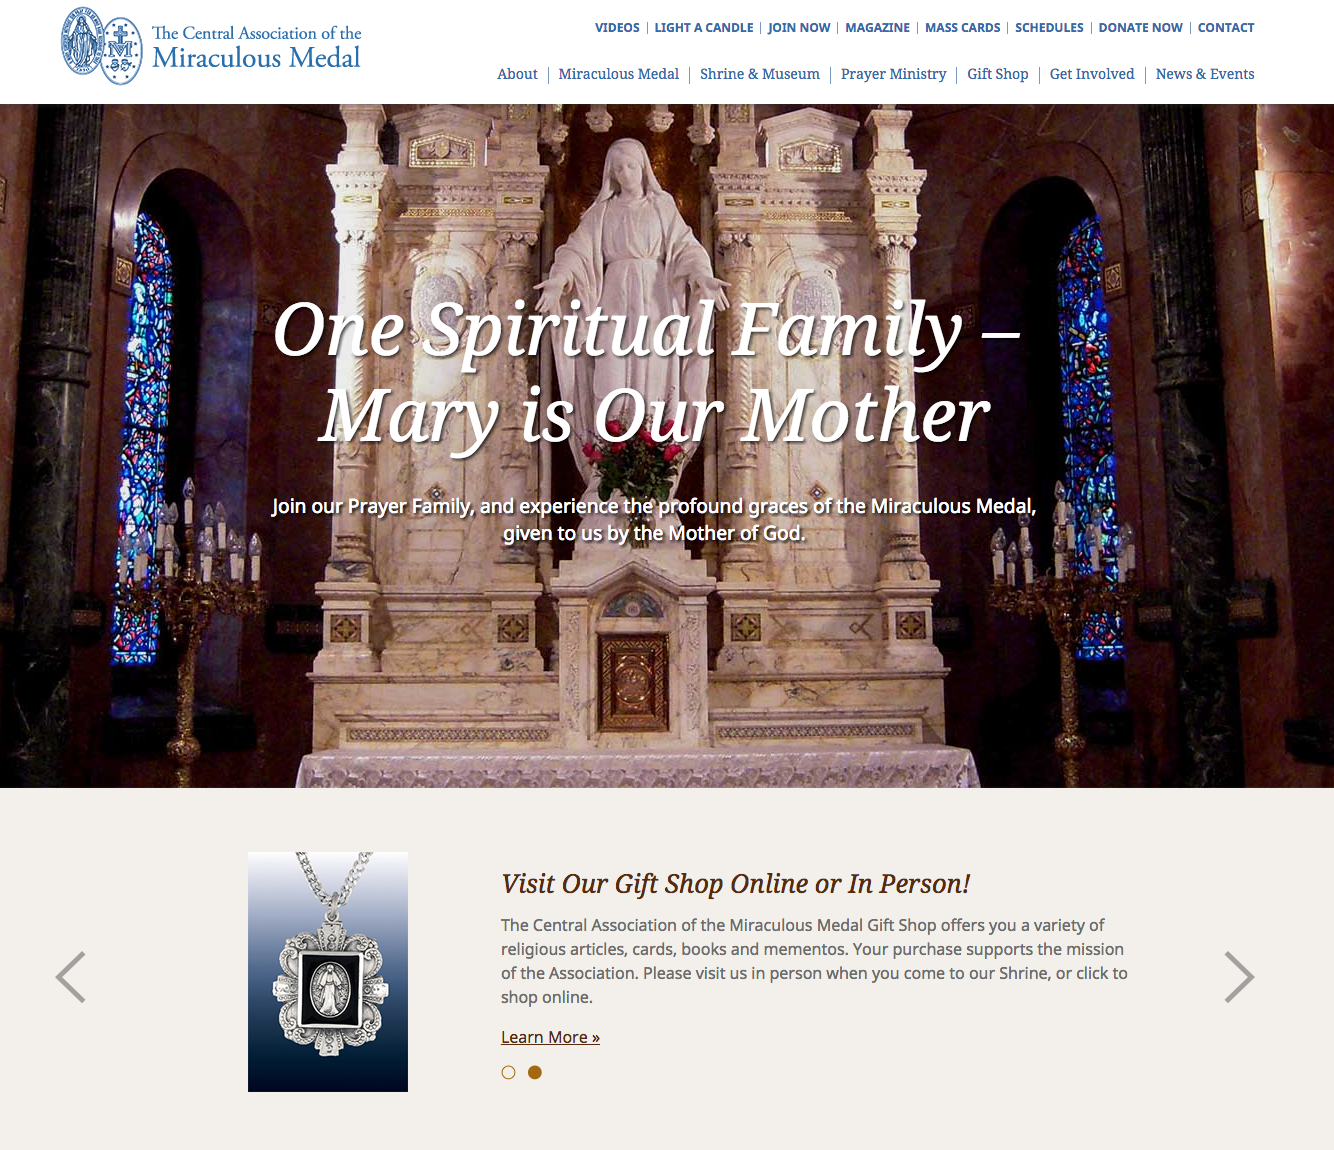 “One Spiritual Family – Mary is Our Mother”